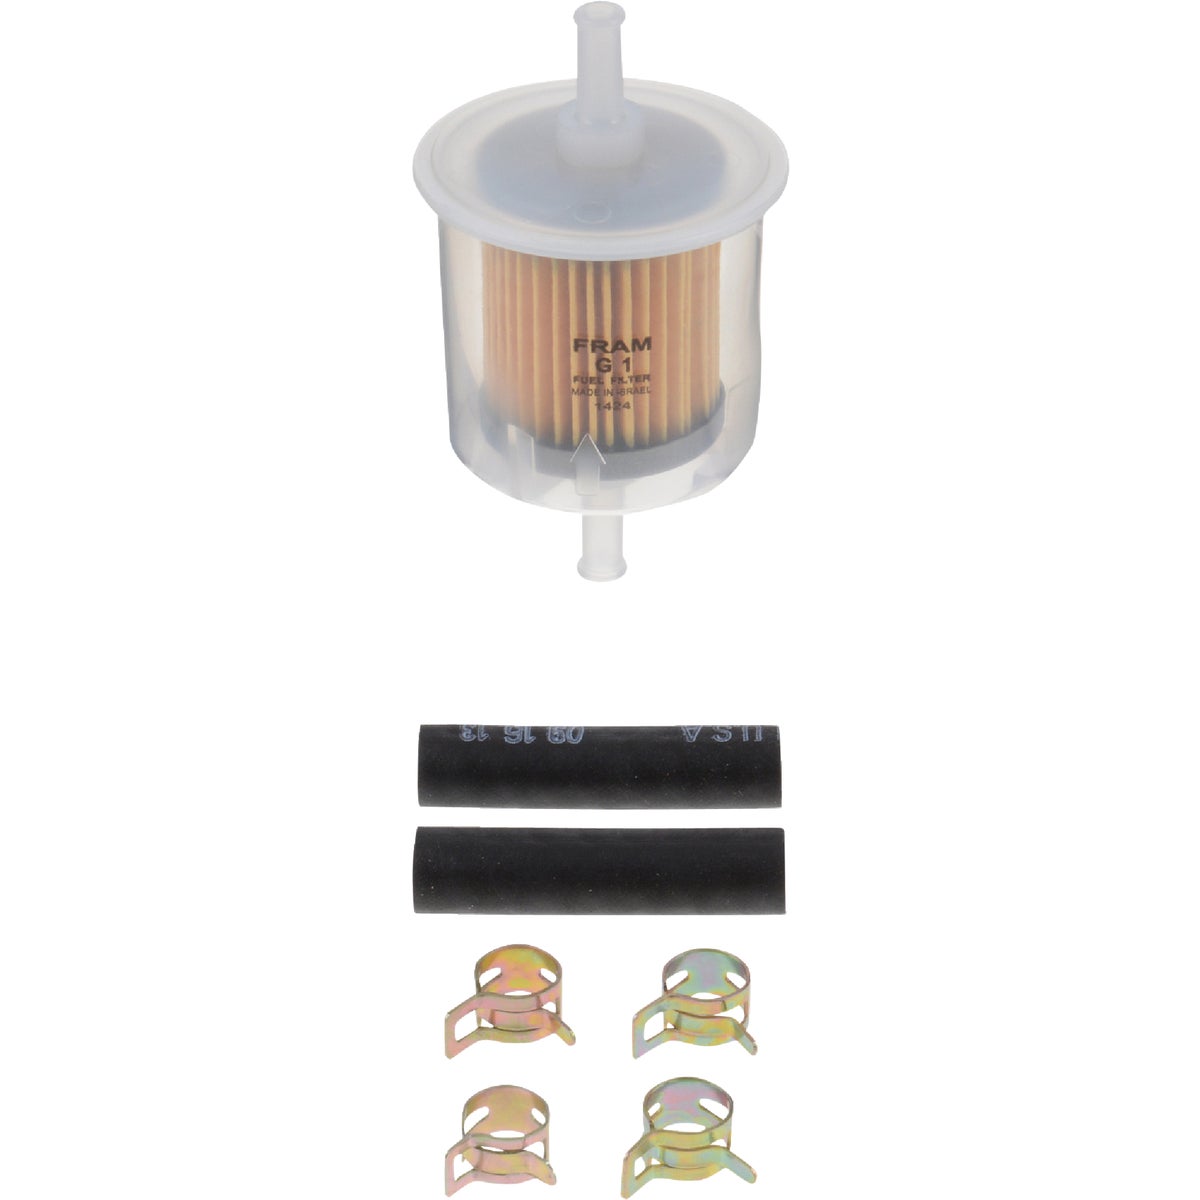 Item 570573, FRAM fuel filters to fit most domestic and import vehicles